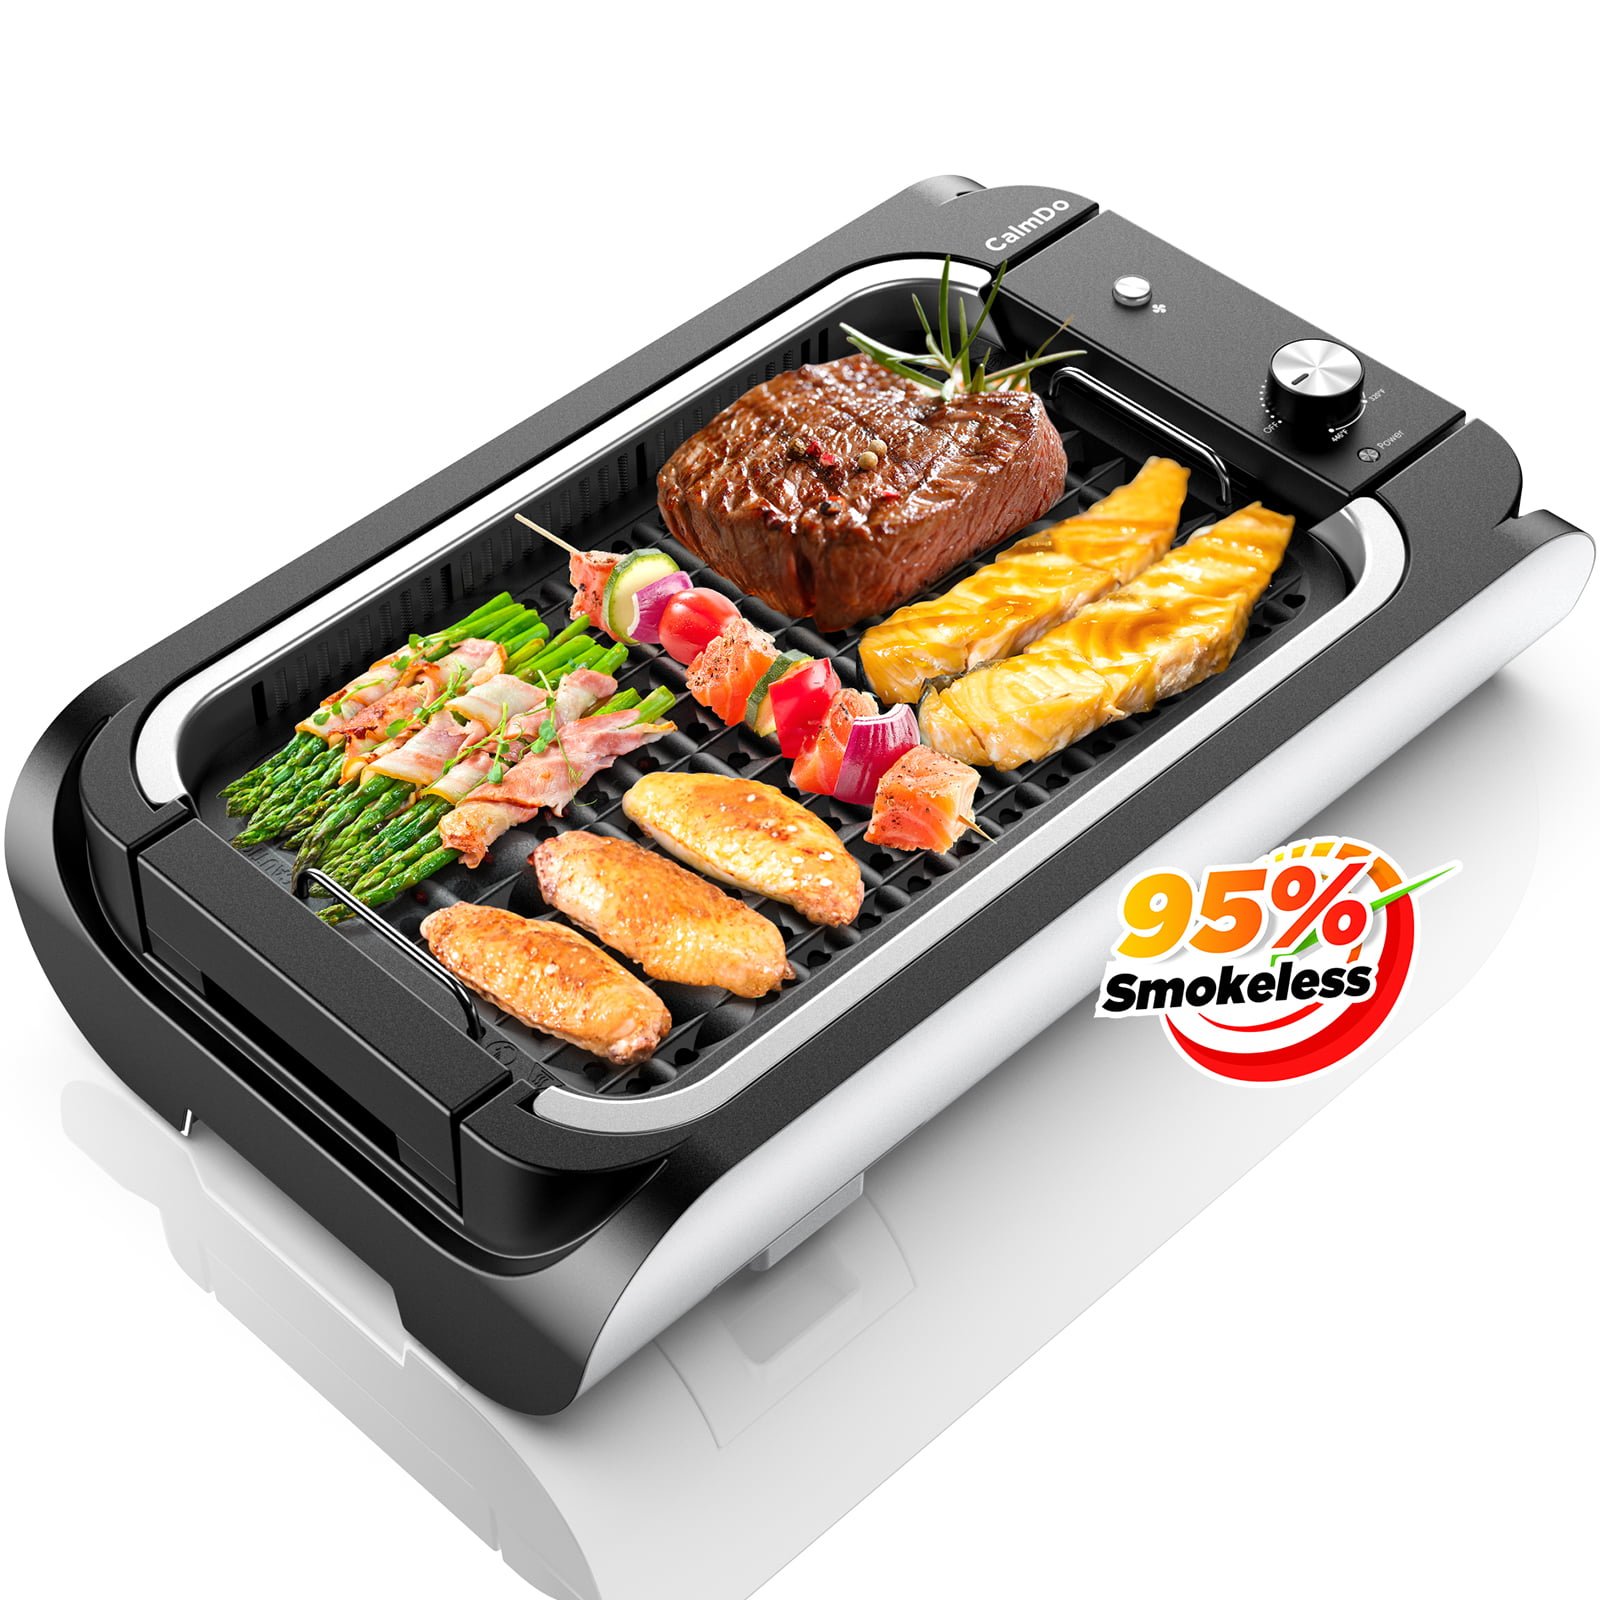 https://themarketdepot.com/wp-content/uploads/2023/01/CalmDo-Electric-Grill-Smokeless-Indoor-Grill-with-Tempered-Glass-Lid-2-in-1-Outdoor-BBQ-Grill-with-Removable-Nonstick-Grill-Plate-and-Drip-Tray-Fast-HeatingDishwasher-Safe-Black-1.jpeg